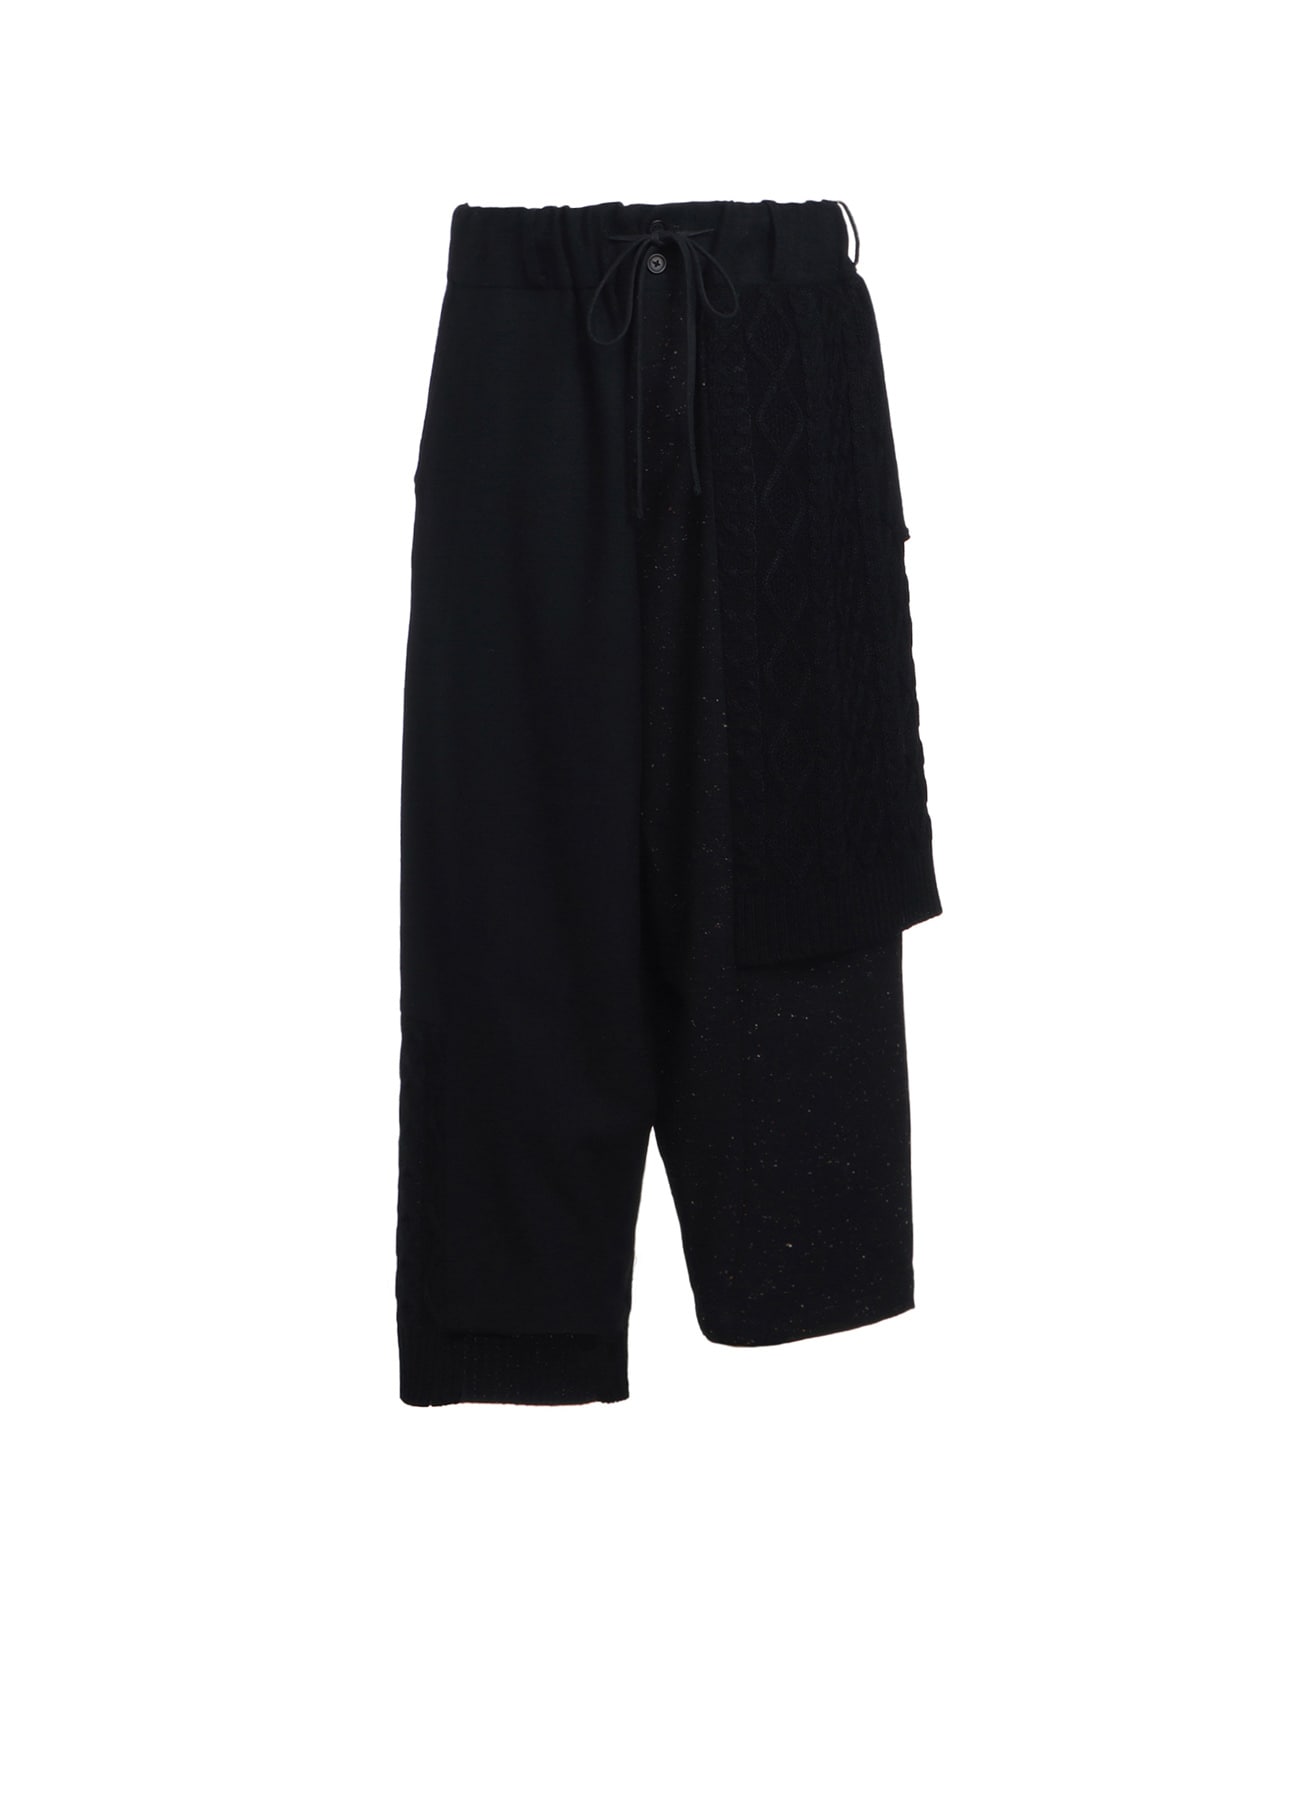 FRENCH WORKER SURGE SUSPENDER PANTS WITH HEM BUTTON DETAIL(M Olive green):  S'YTE｜THE SHOP YOHJI YAMAMOTO